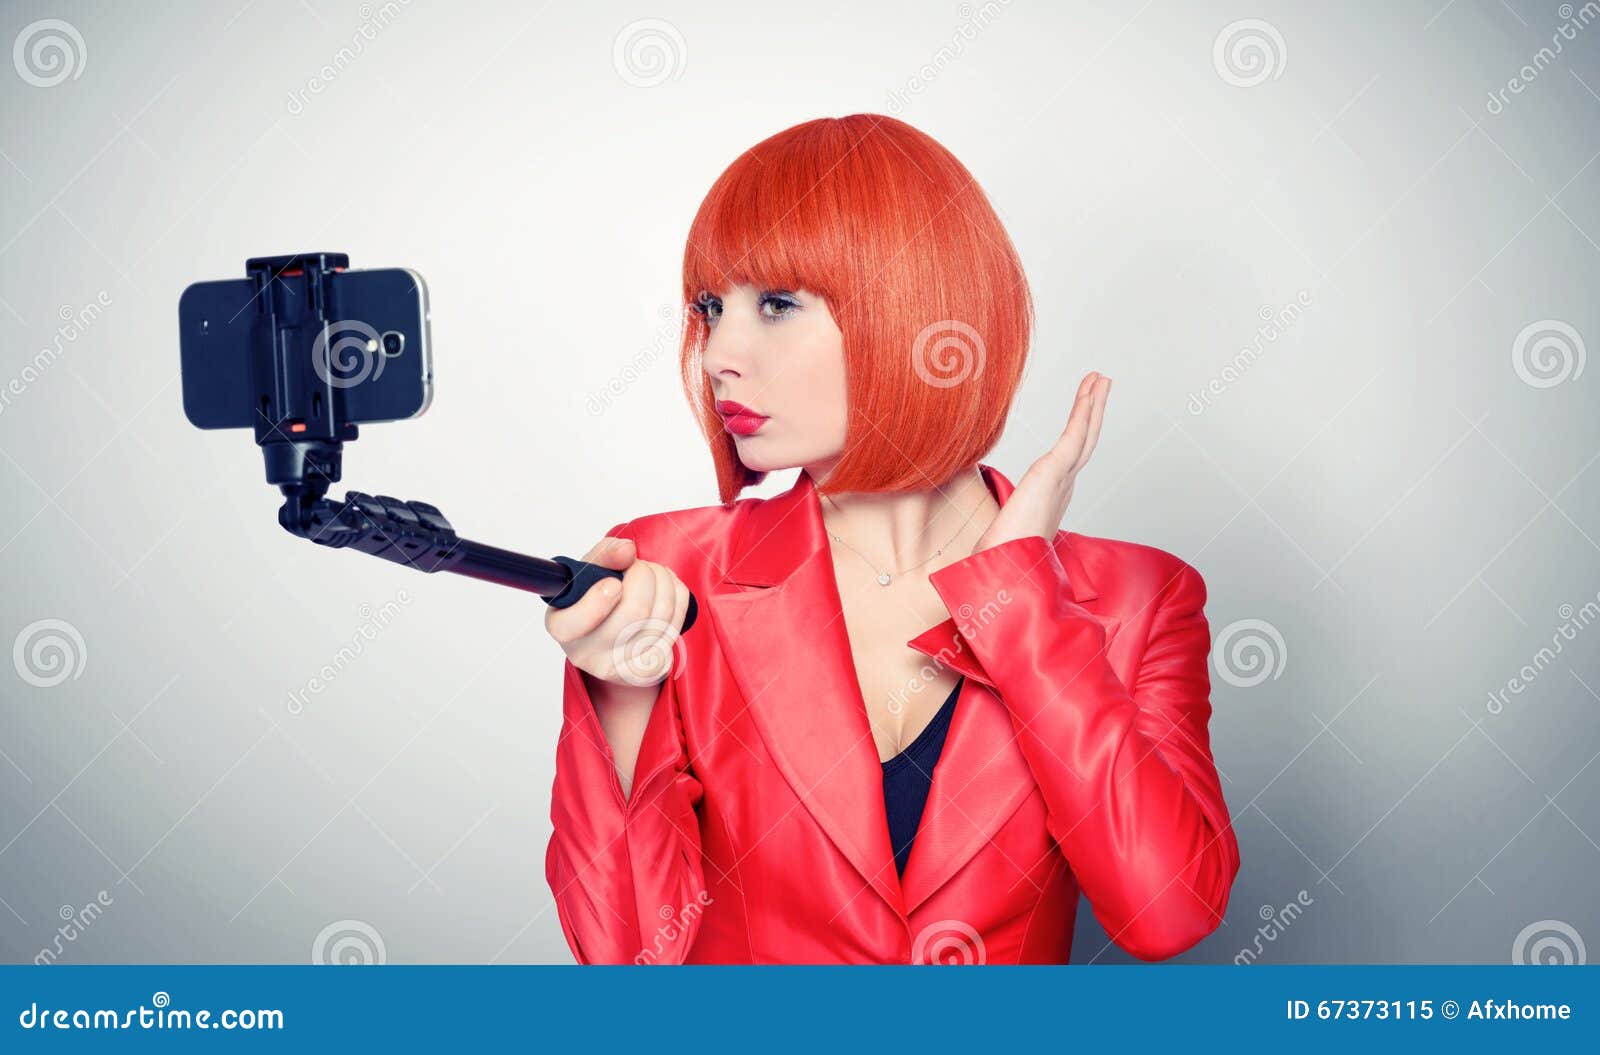 young glamor girl in red making selfie with a stick